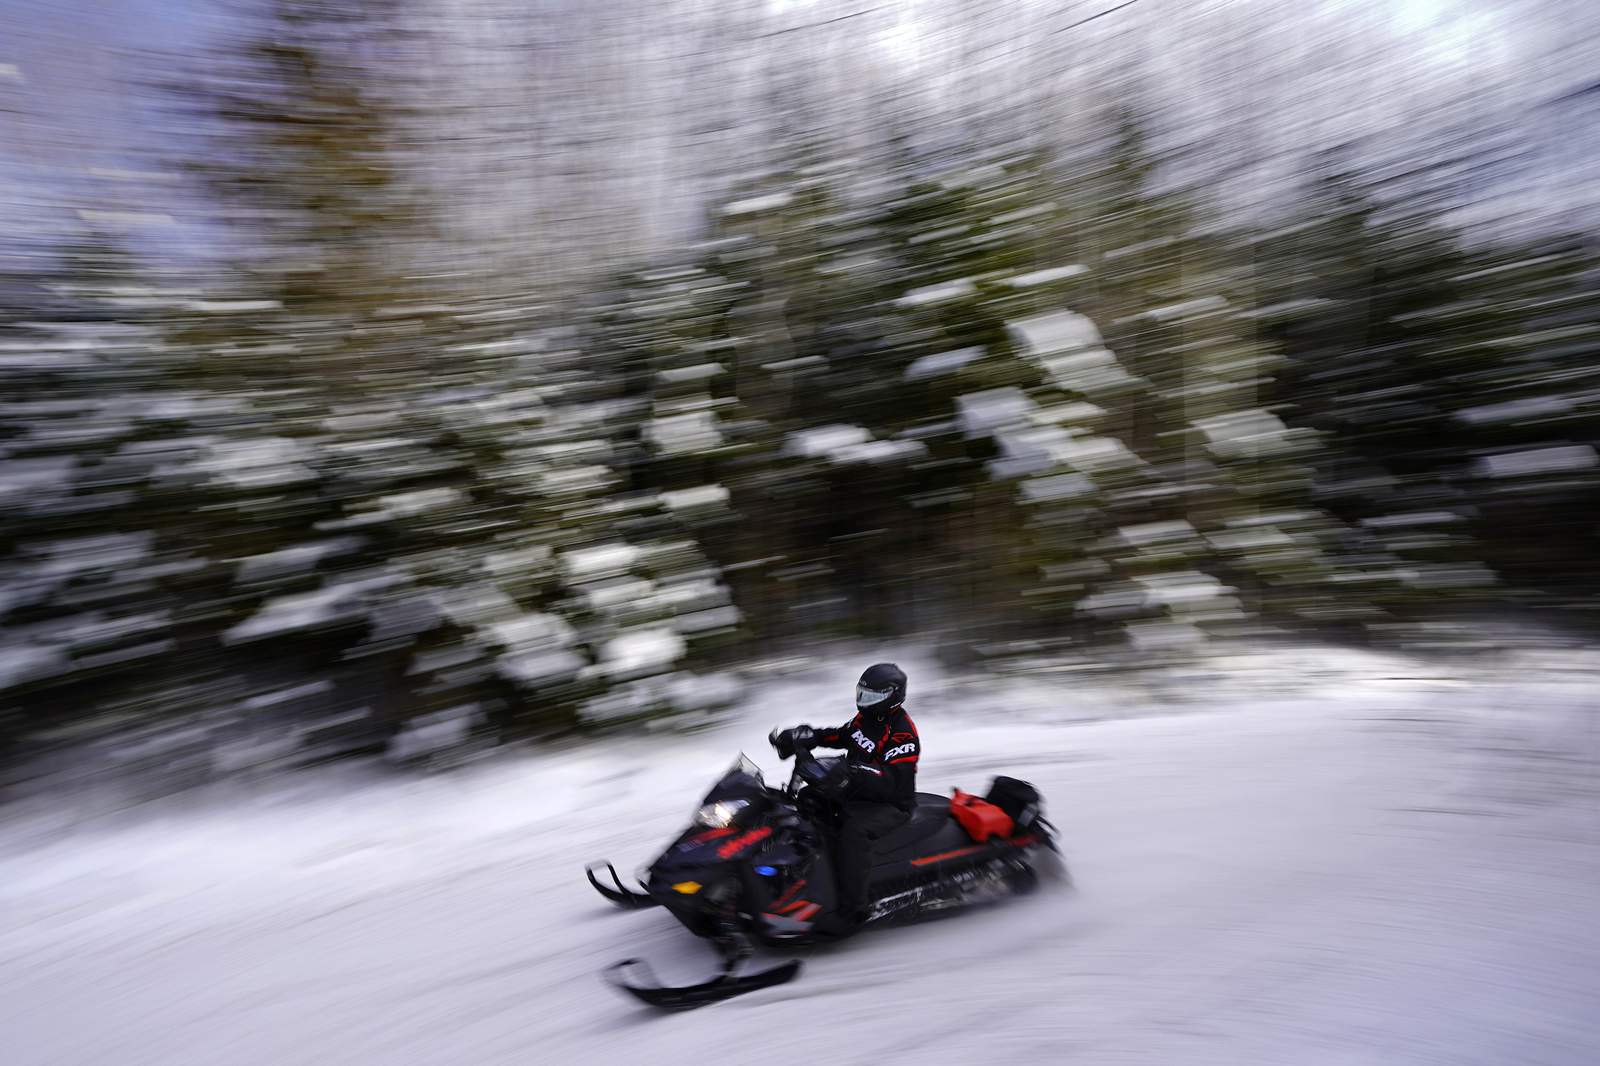 Masks, social distancing and speed: Snowmobiles enjoy boom